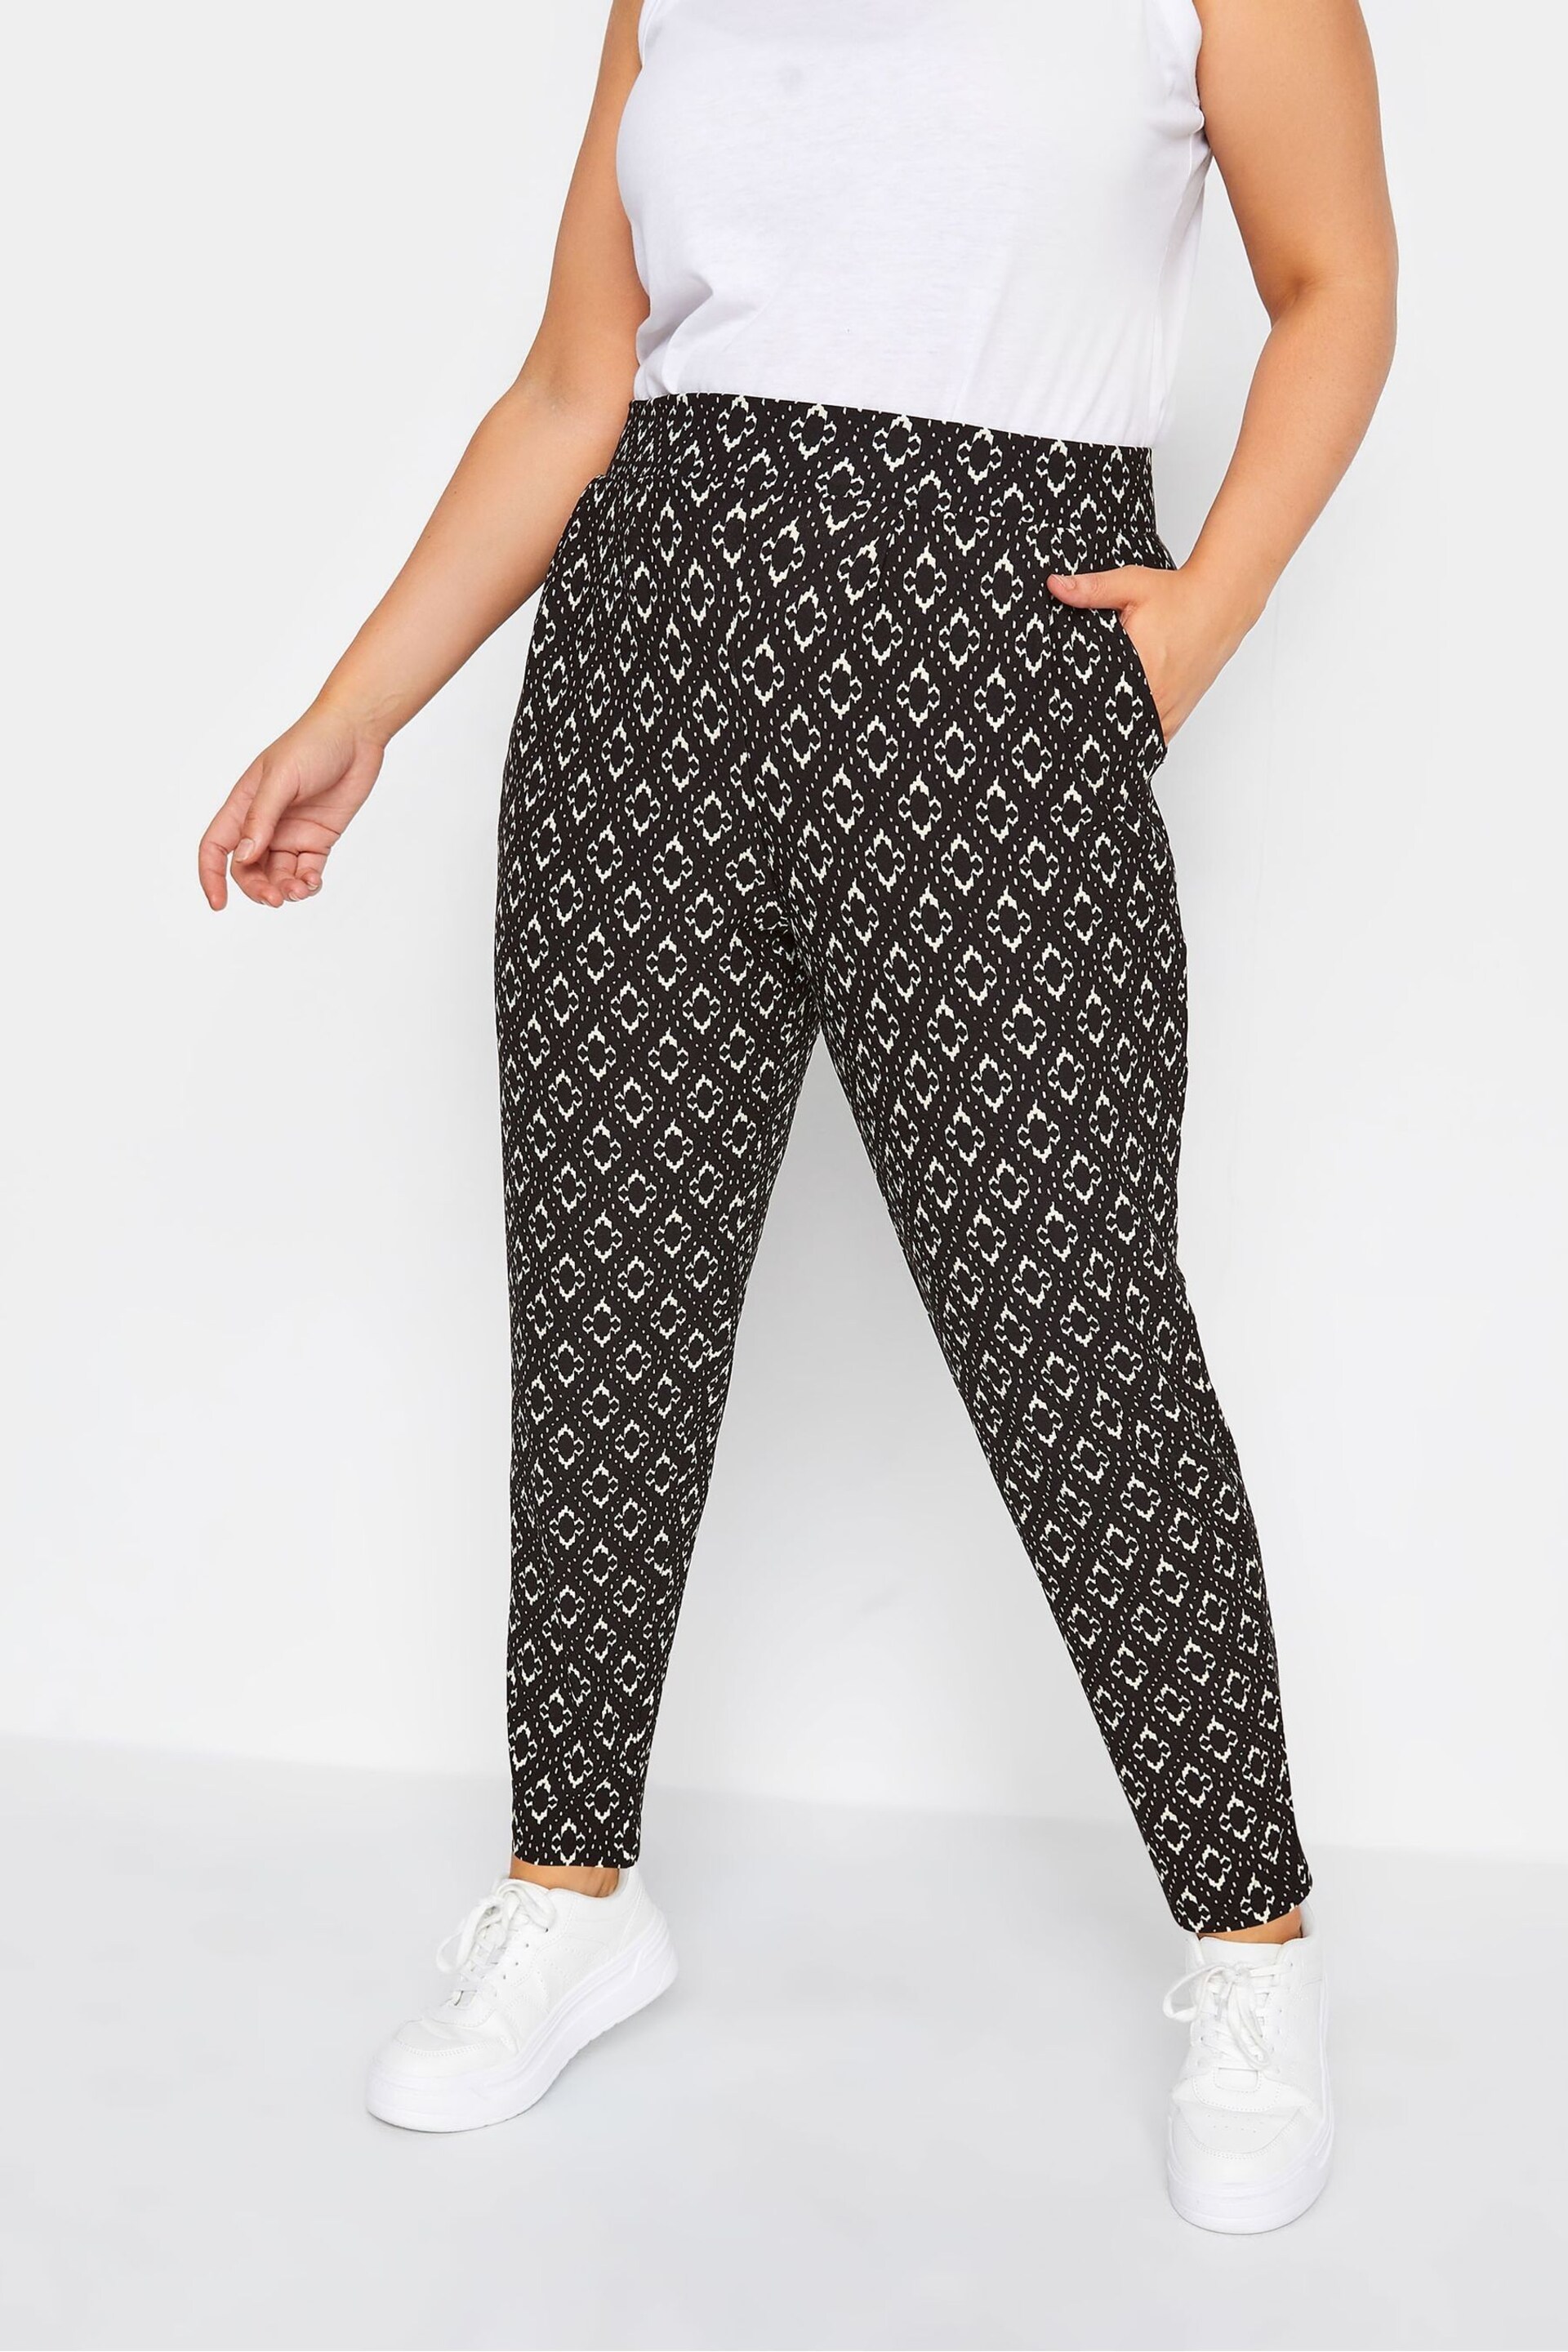 Yours Curve Black Abstract Double Pleated Harem Trousers - Image 1 of 3